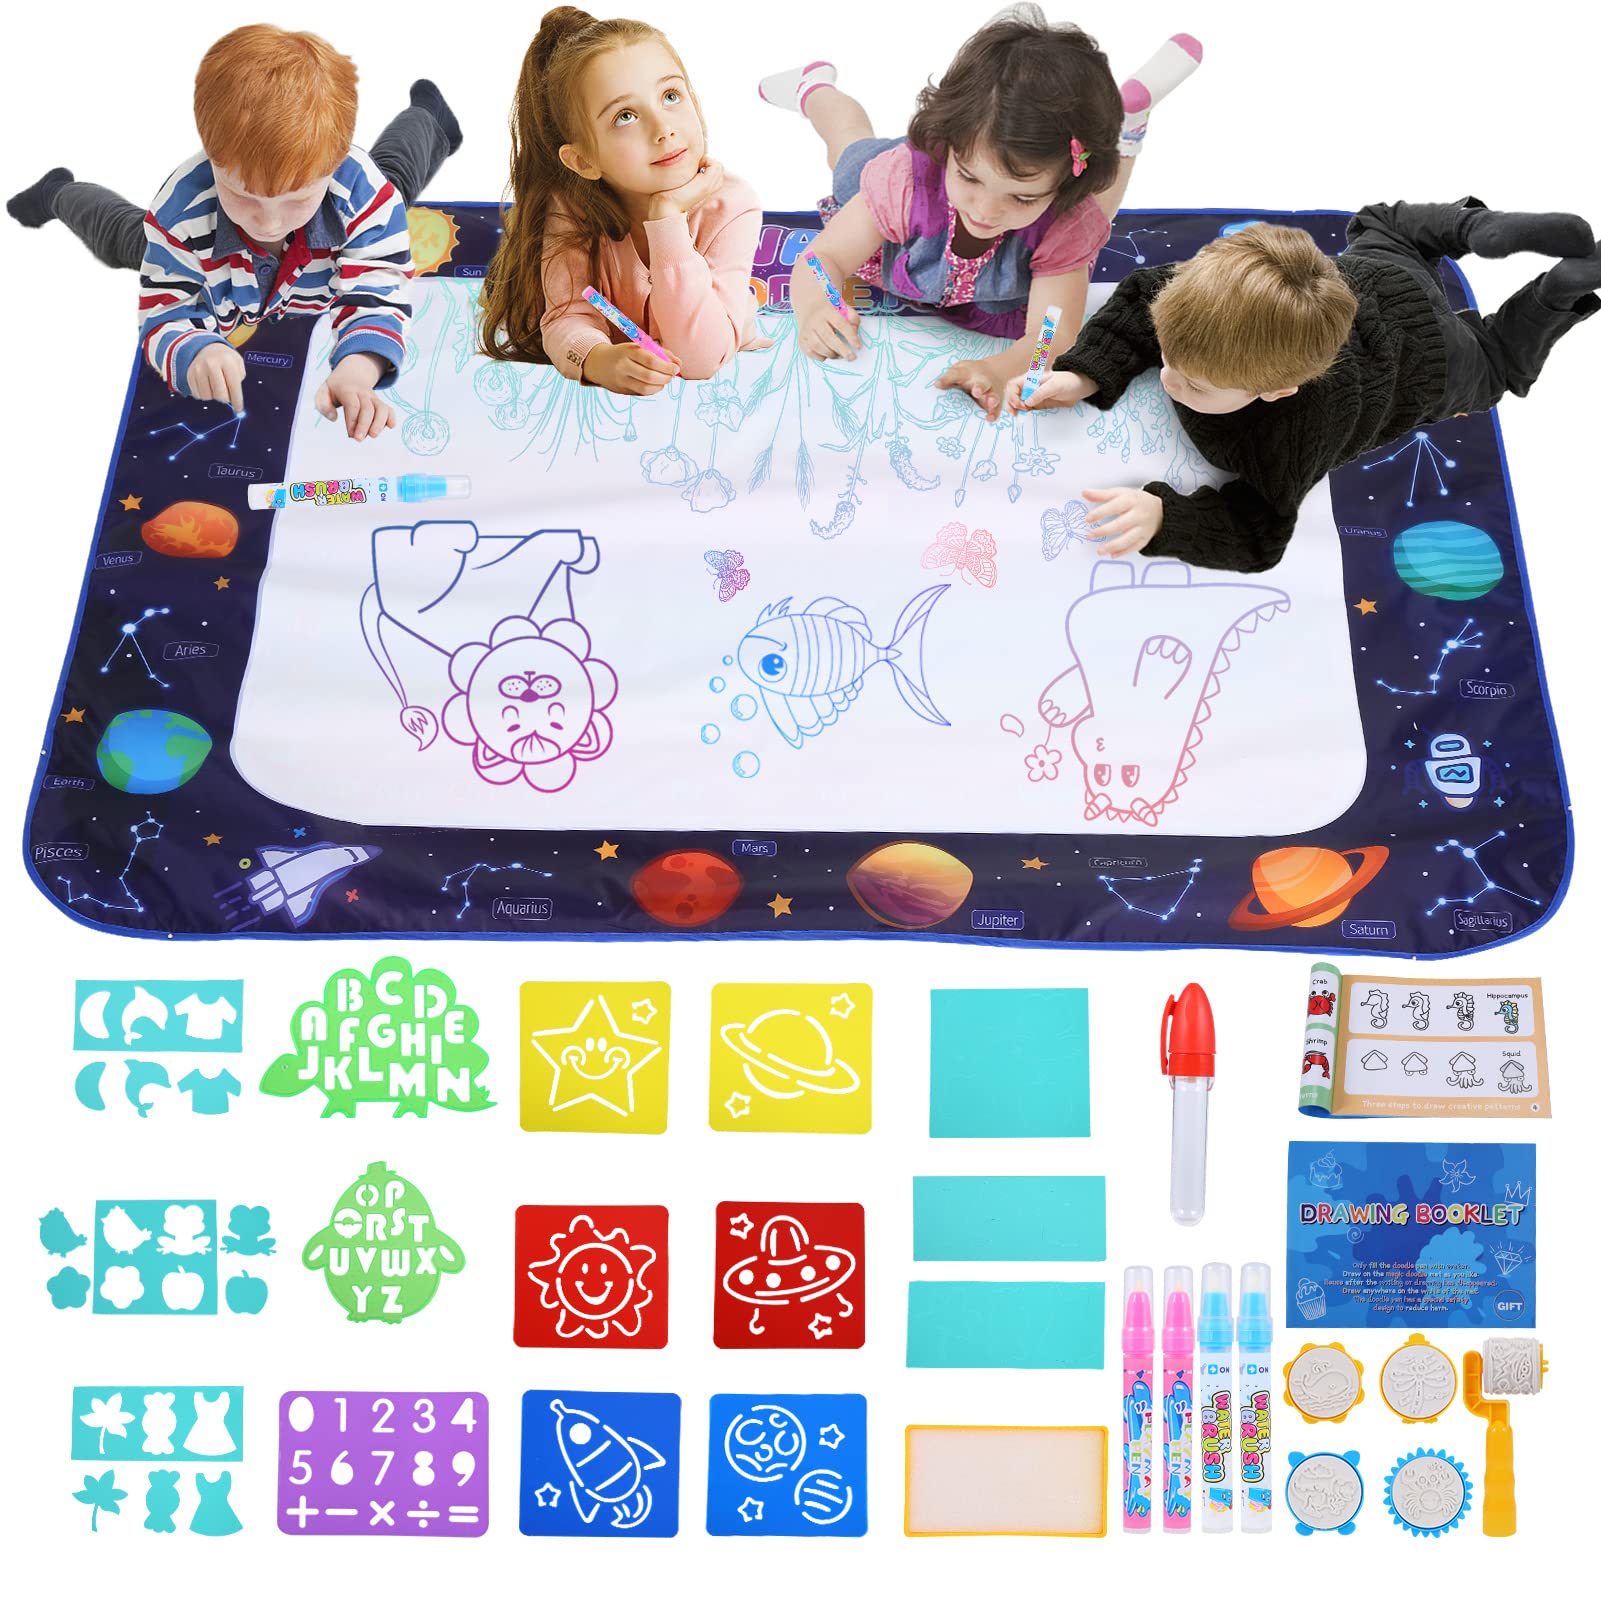 Water Doodle Mat - 60 x 45 Inches Extra Large Aqua Magic Doodle Drawing Mat, Educational Toys Gifts for Kids Toddlers Age 2 3 4 5 6 7 8 Year Old Boys Girls, Planets and Space Theme